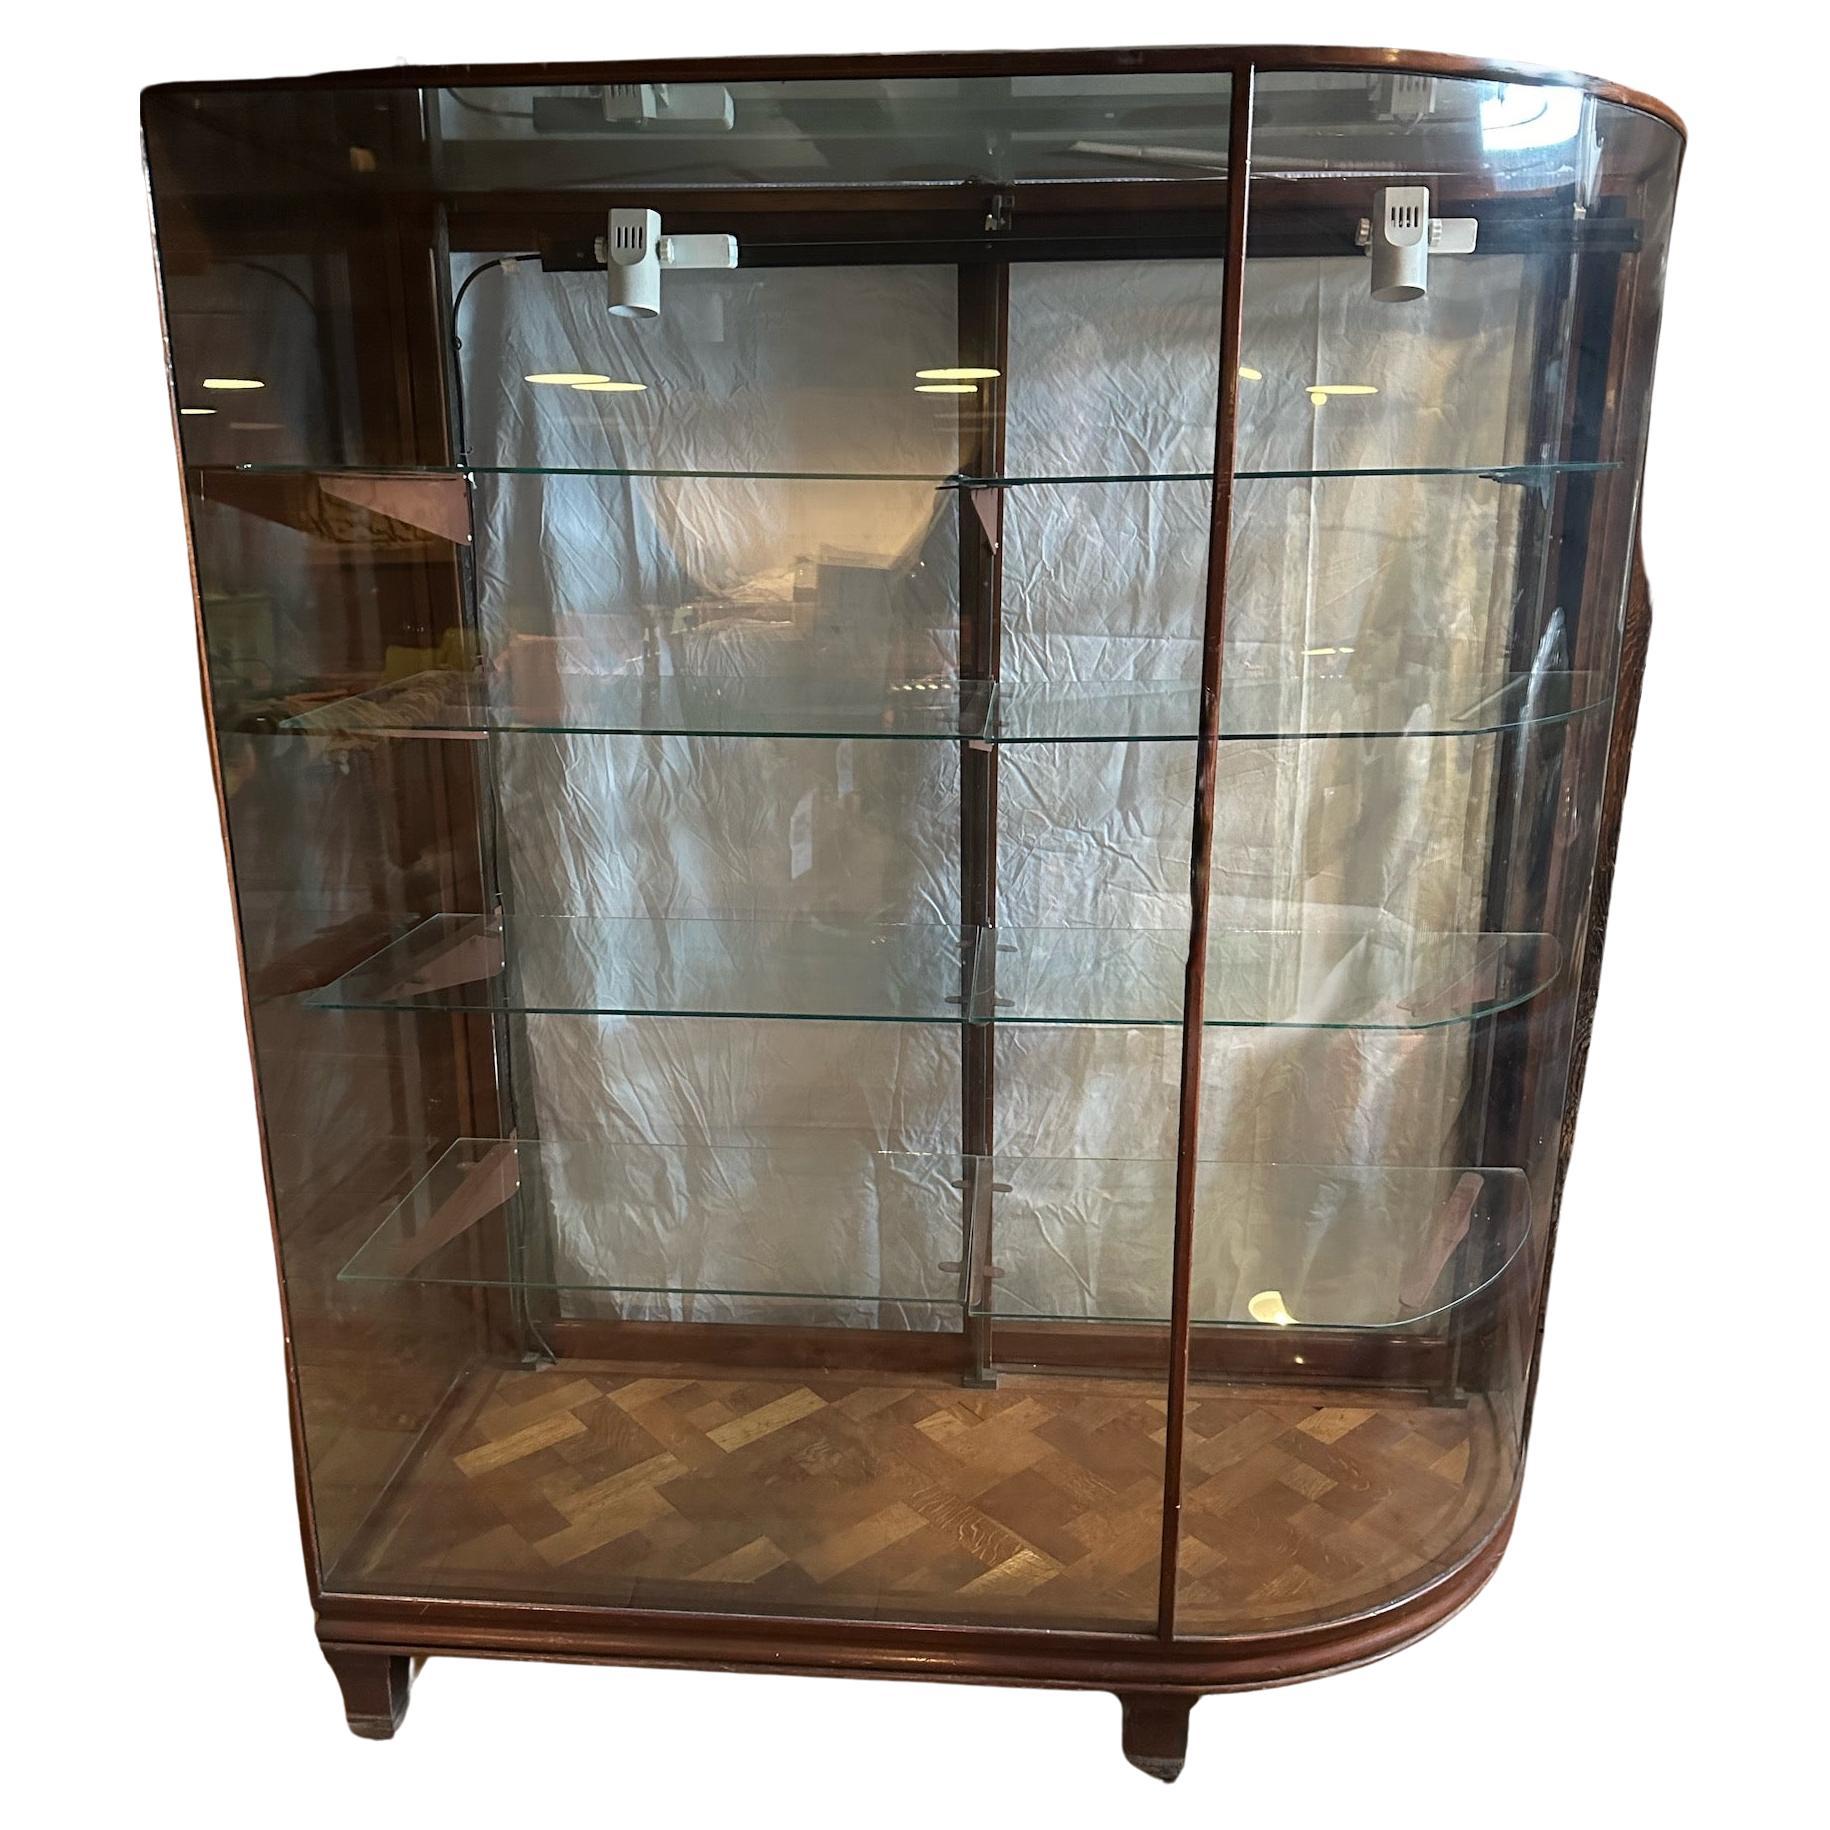 Pair 19th C Bow Glass Sided Display Cabinets from an Upscale Boston Fashion Shop In Good Condition For Sale In Nashua, NH